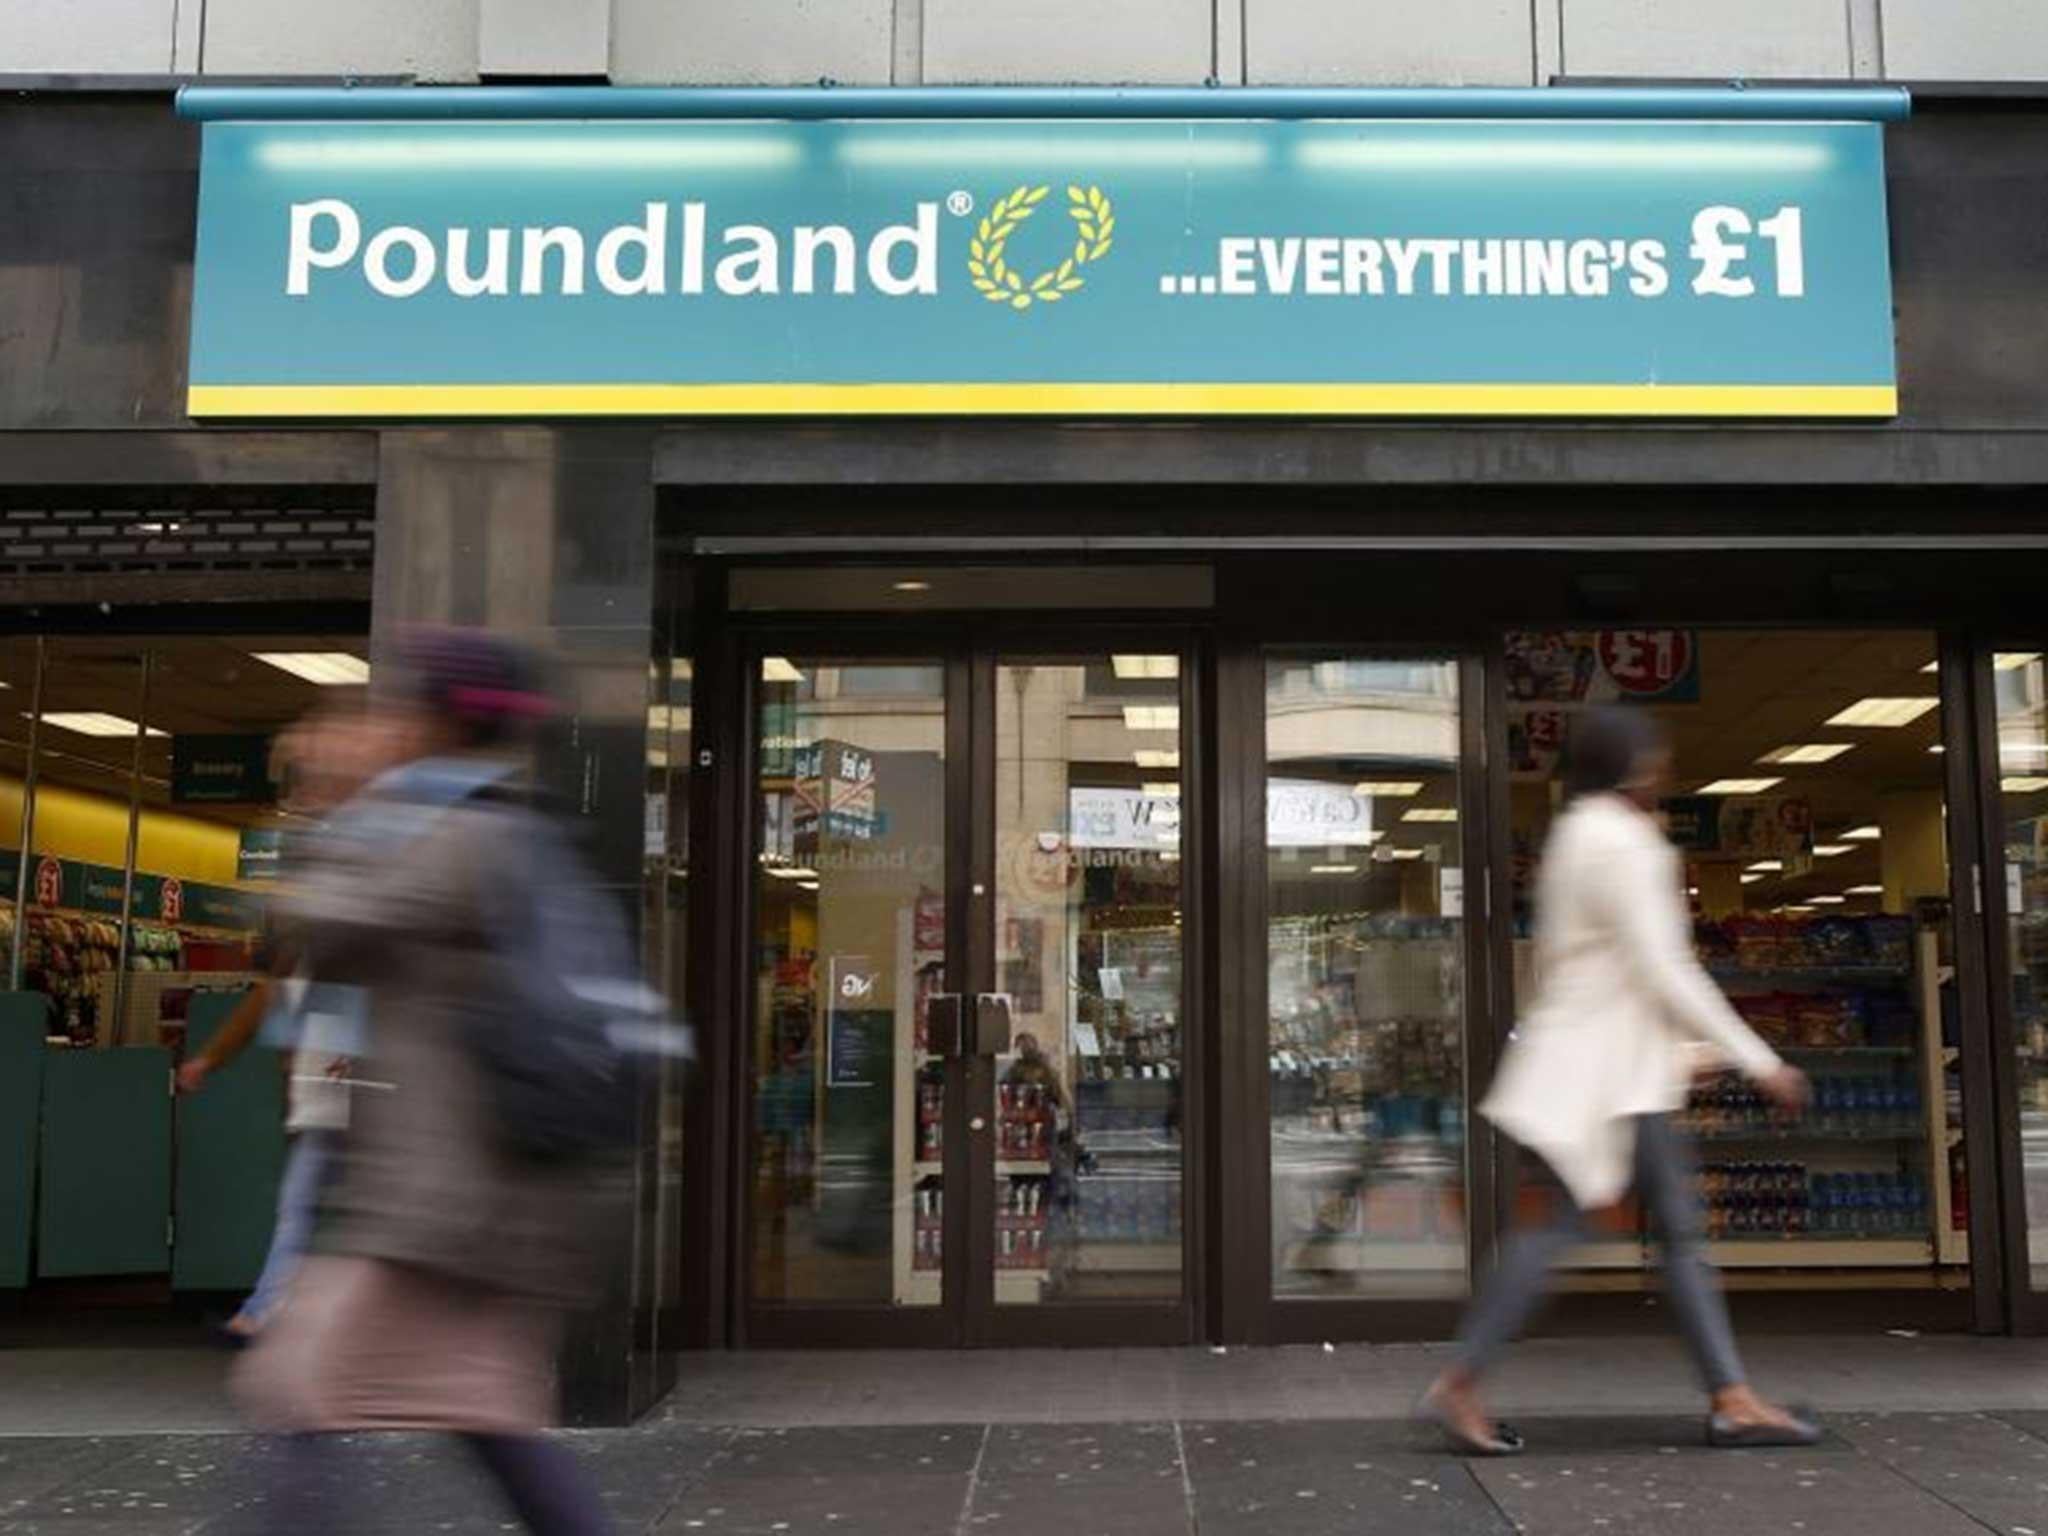 Poundland said it would review the decision before making a formal response